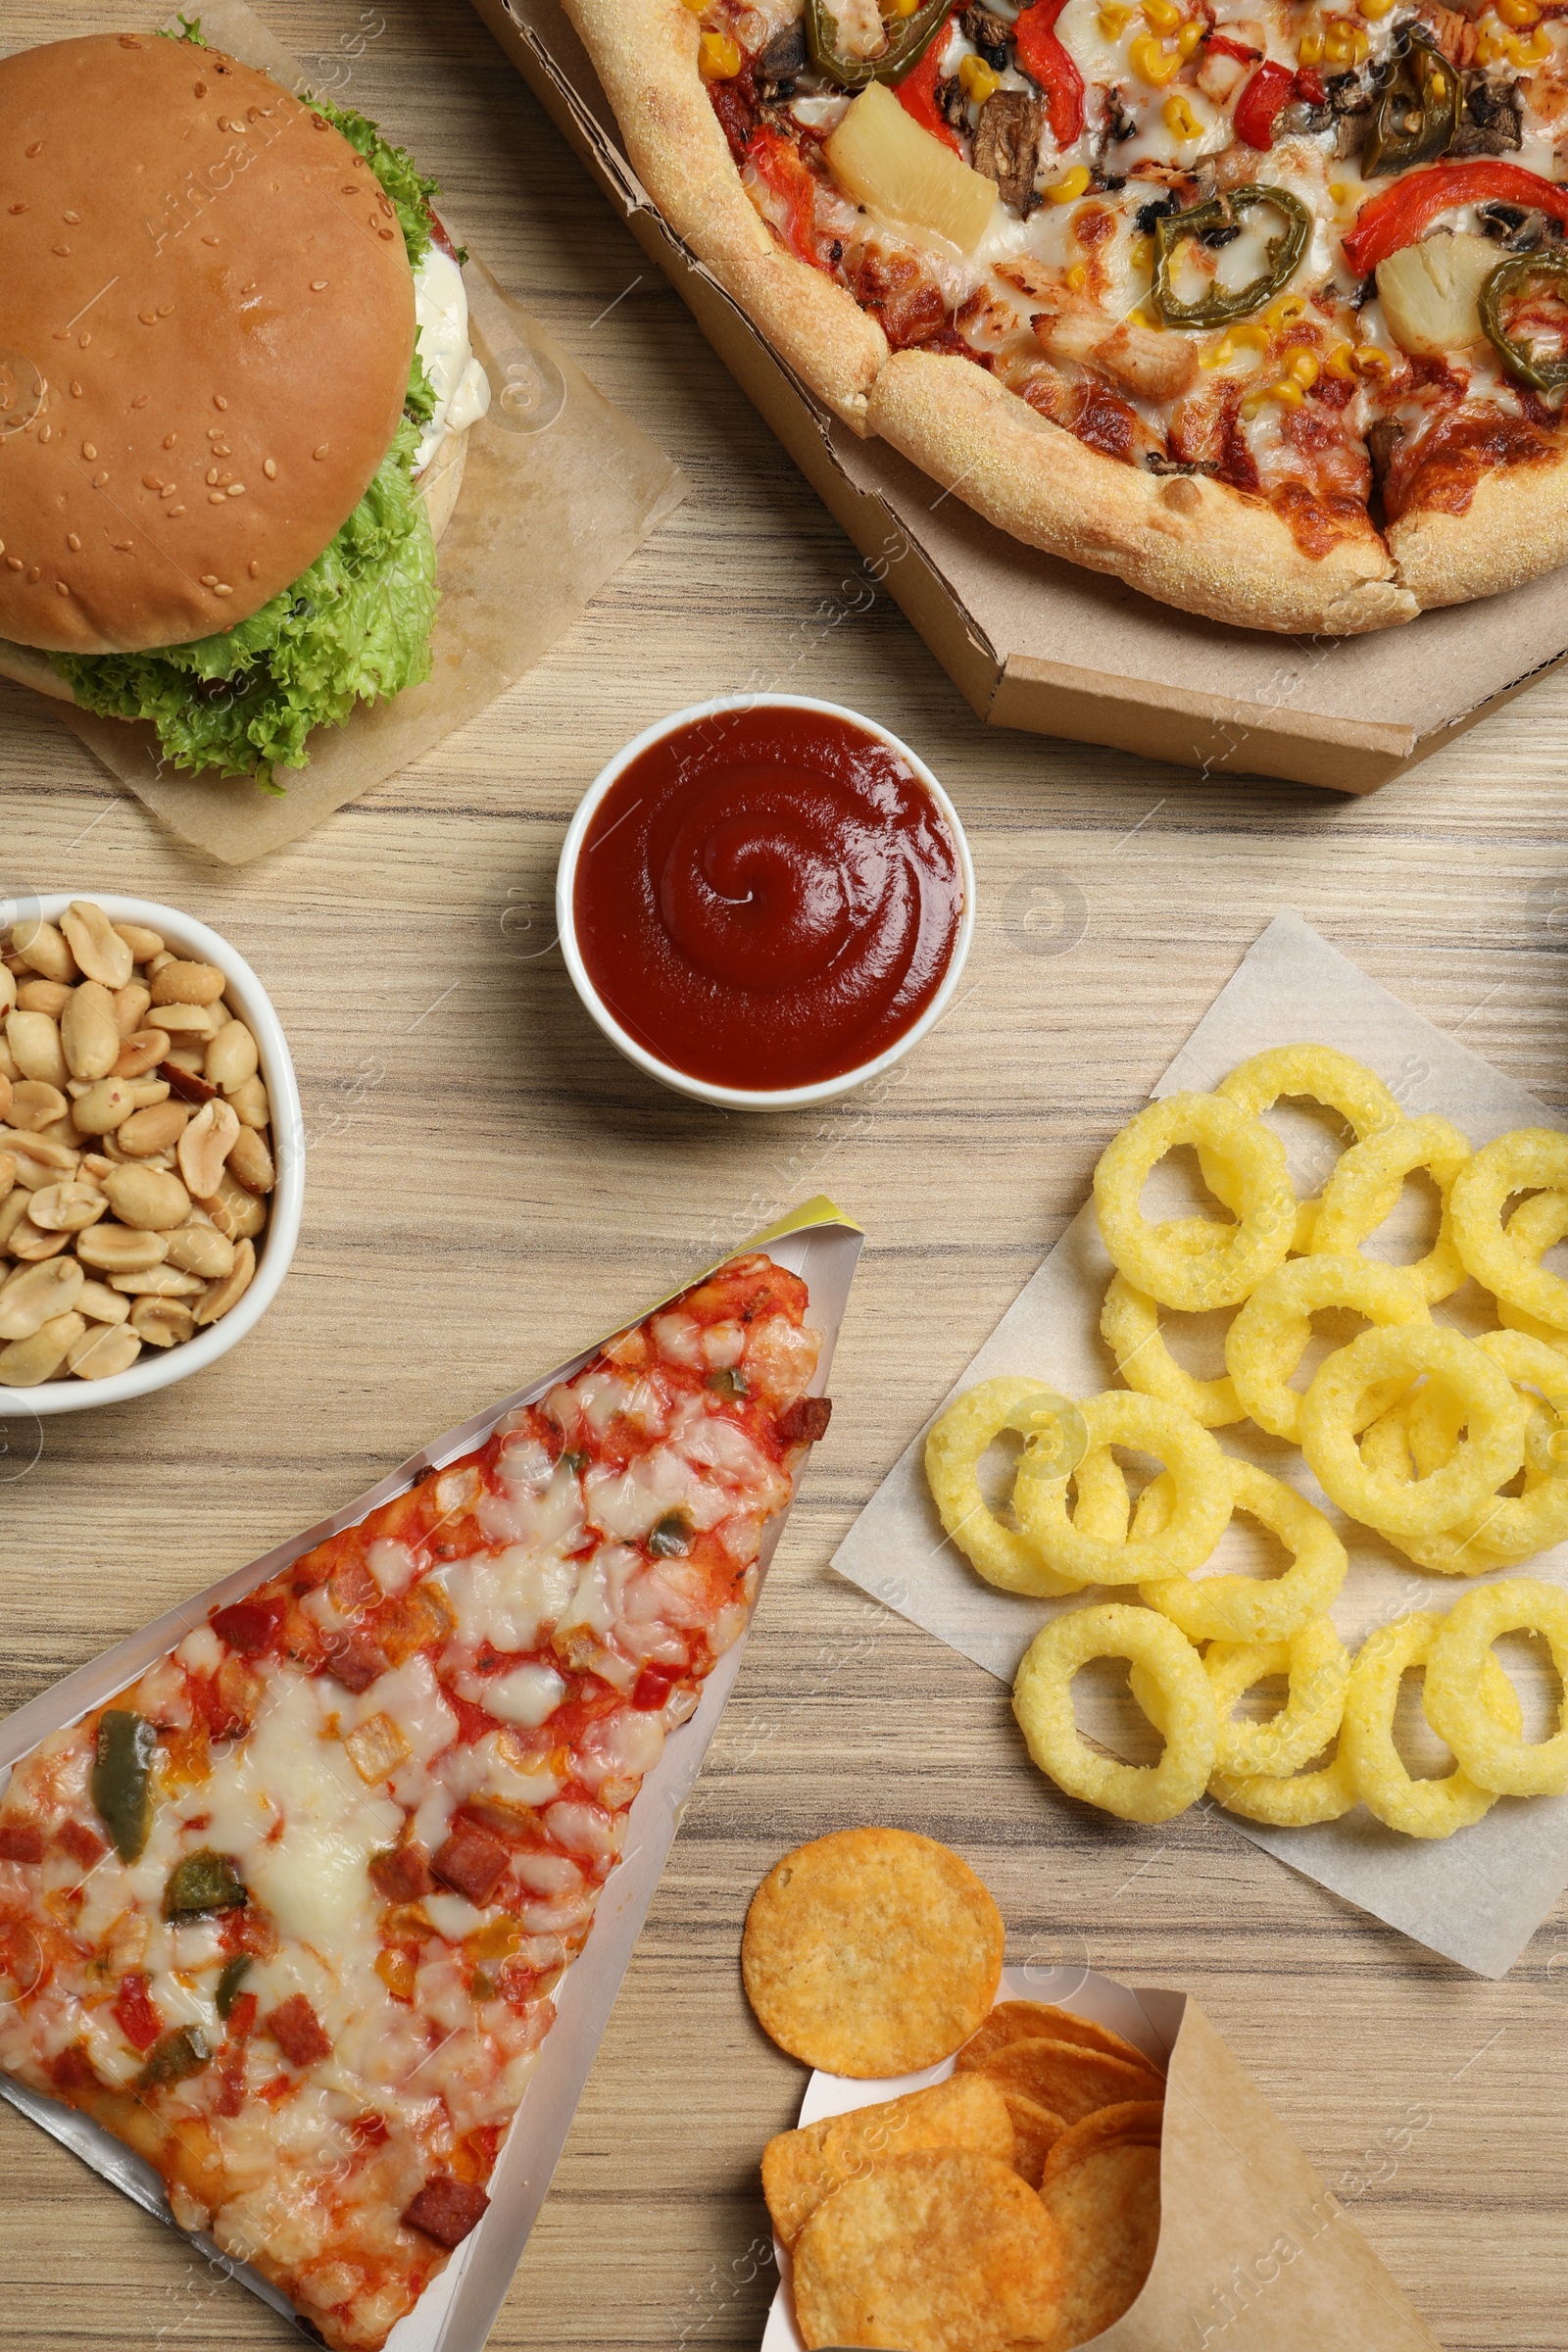 Photo of French fries, pizza and other fast food on wooden table, flat lay